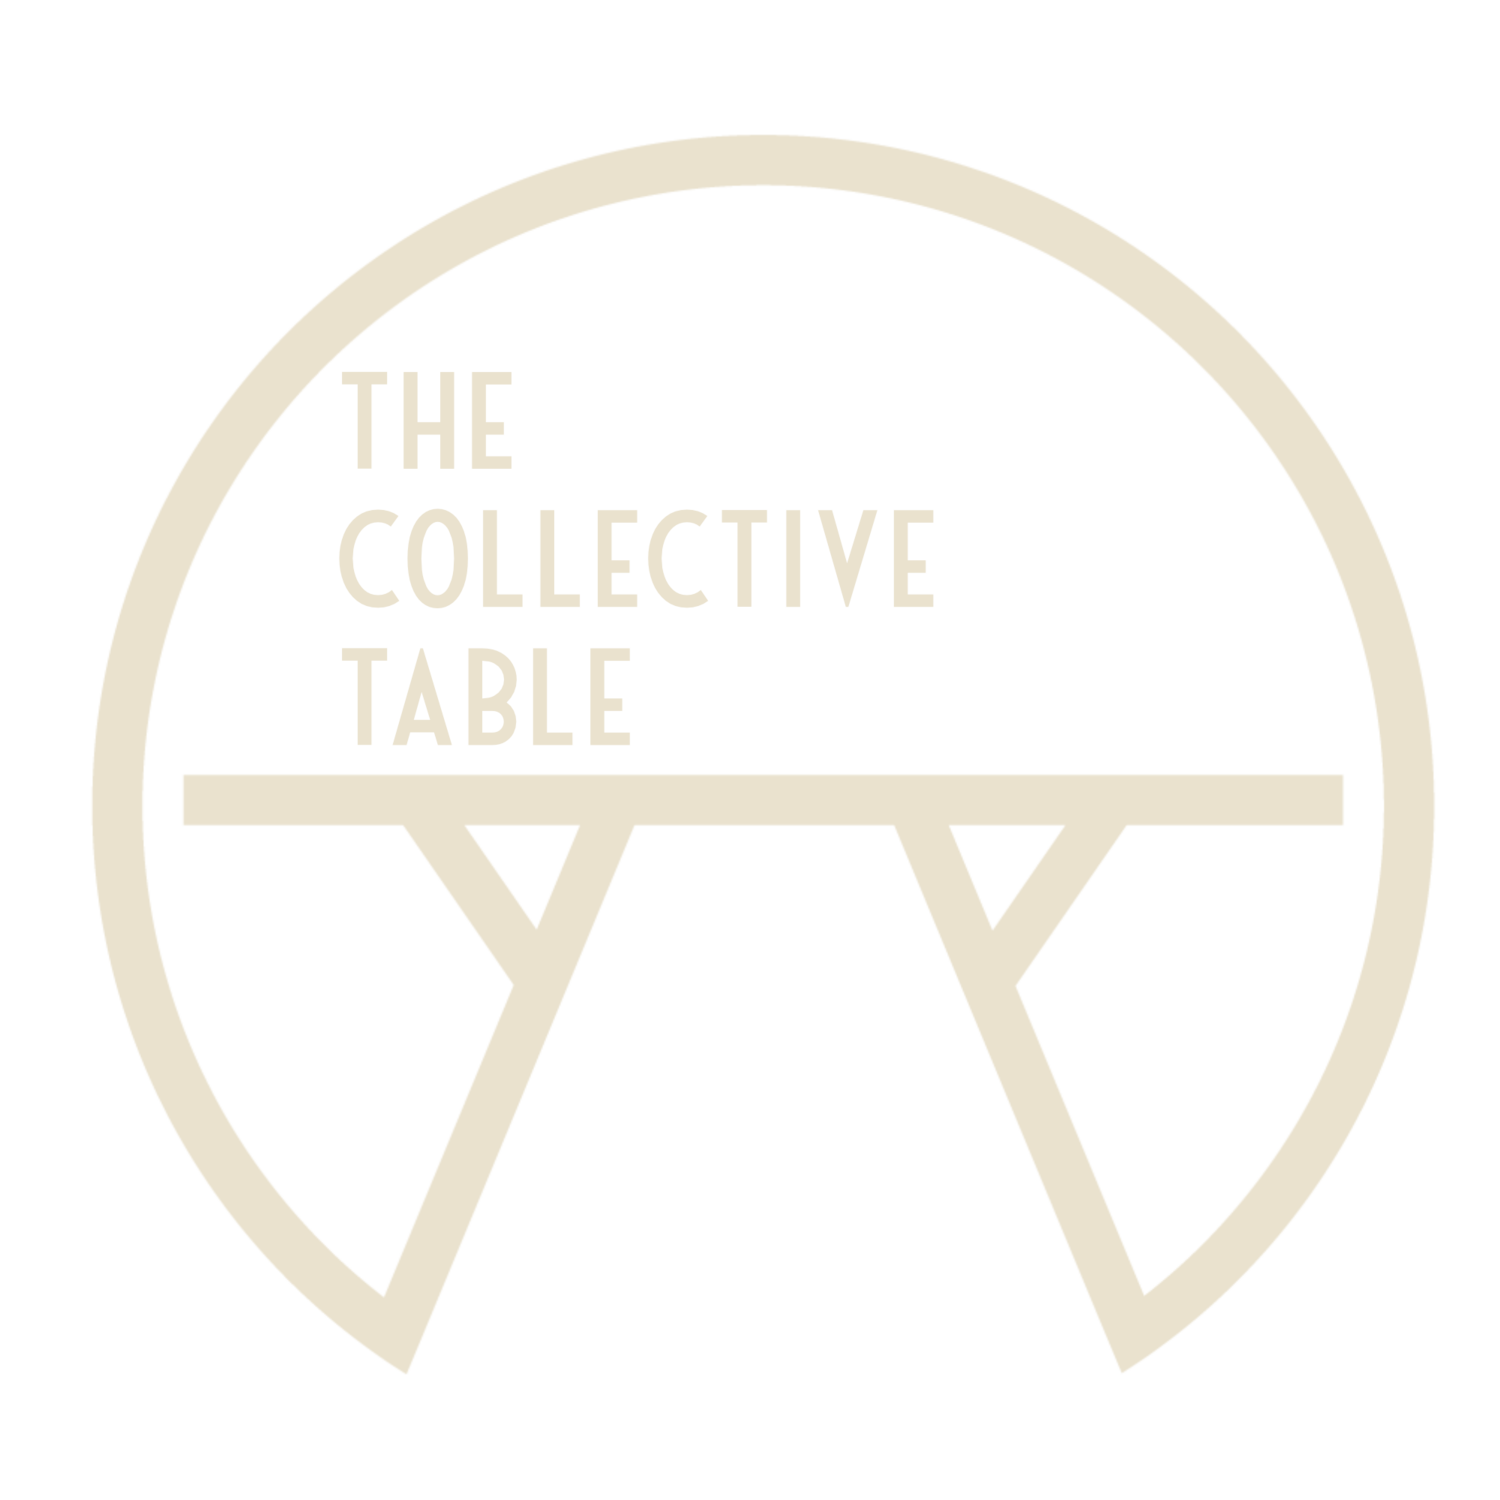 The Collective Table